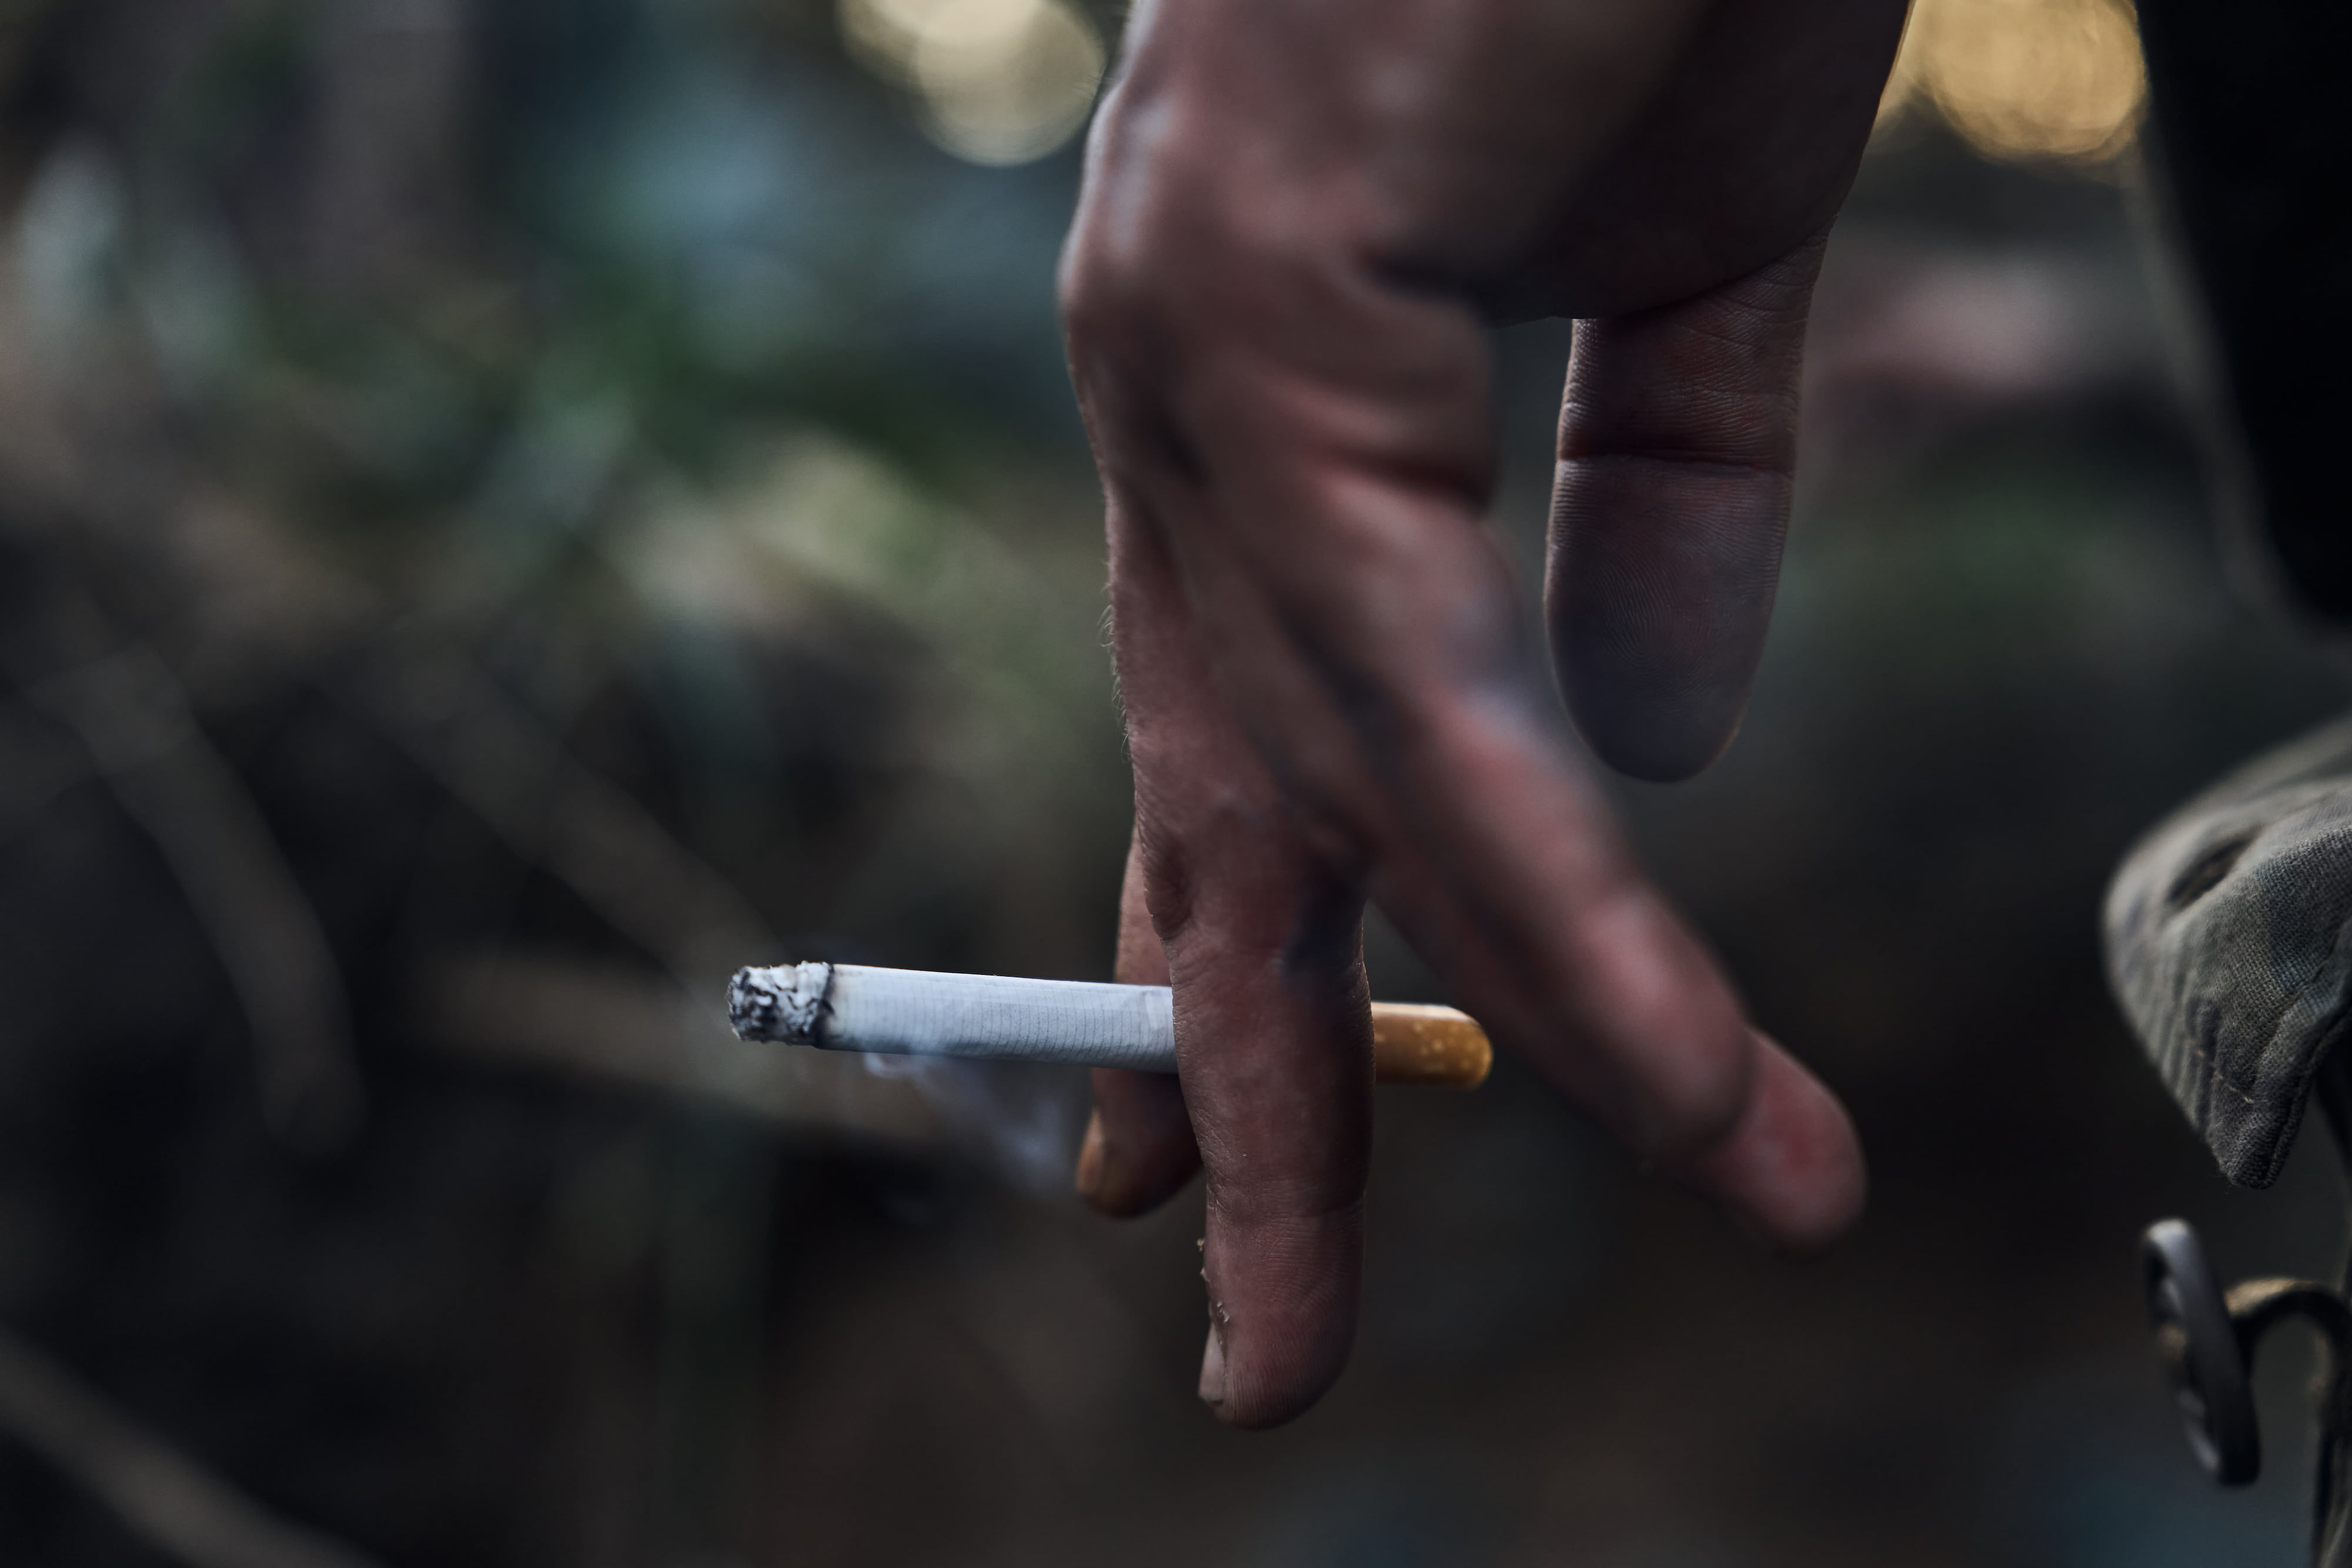 WHO: Global Tobacco Use Declining